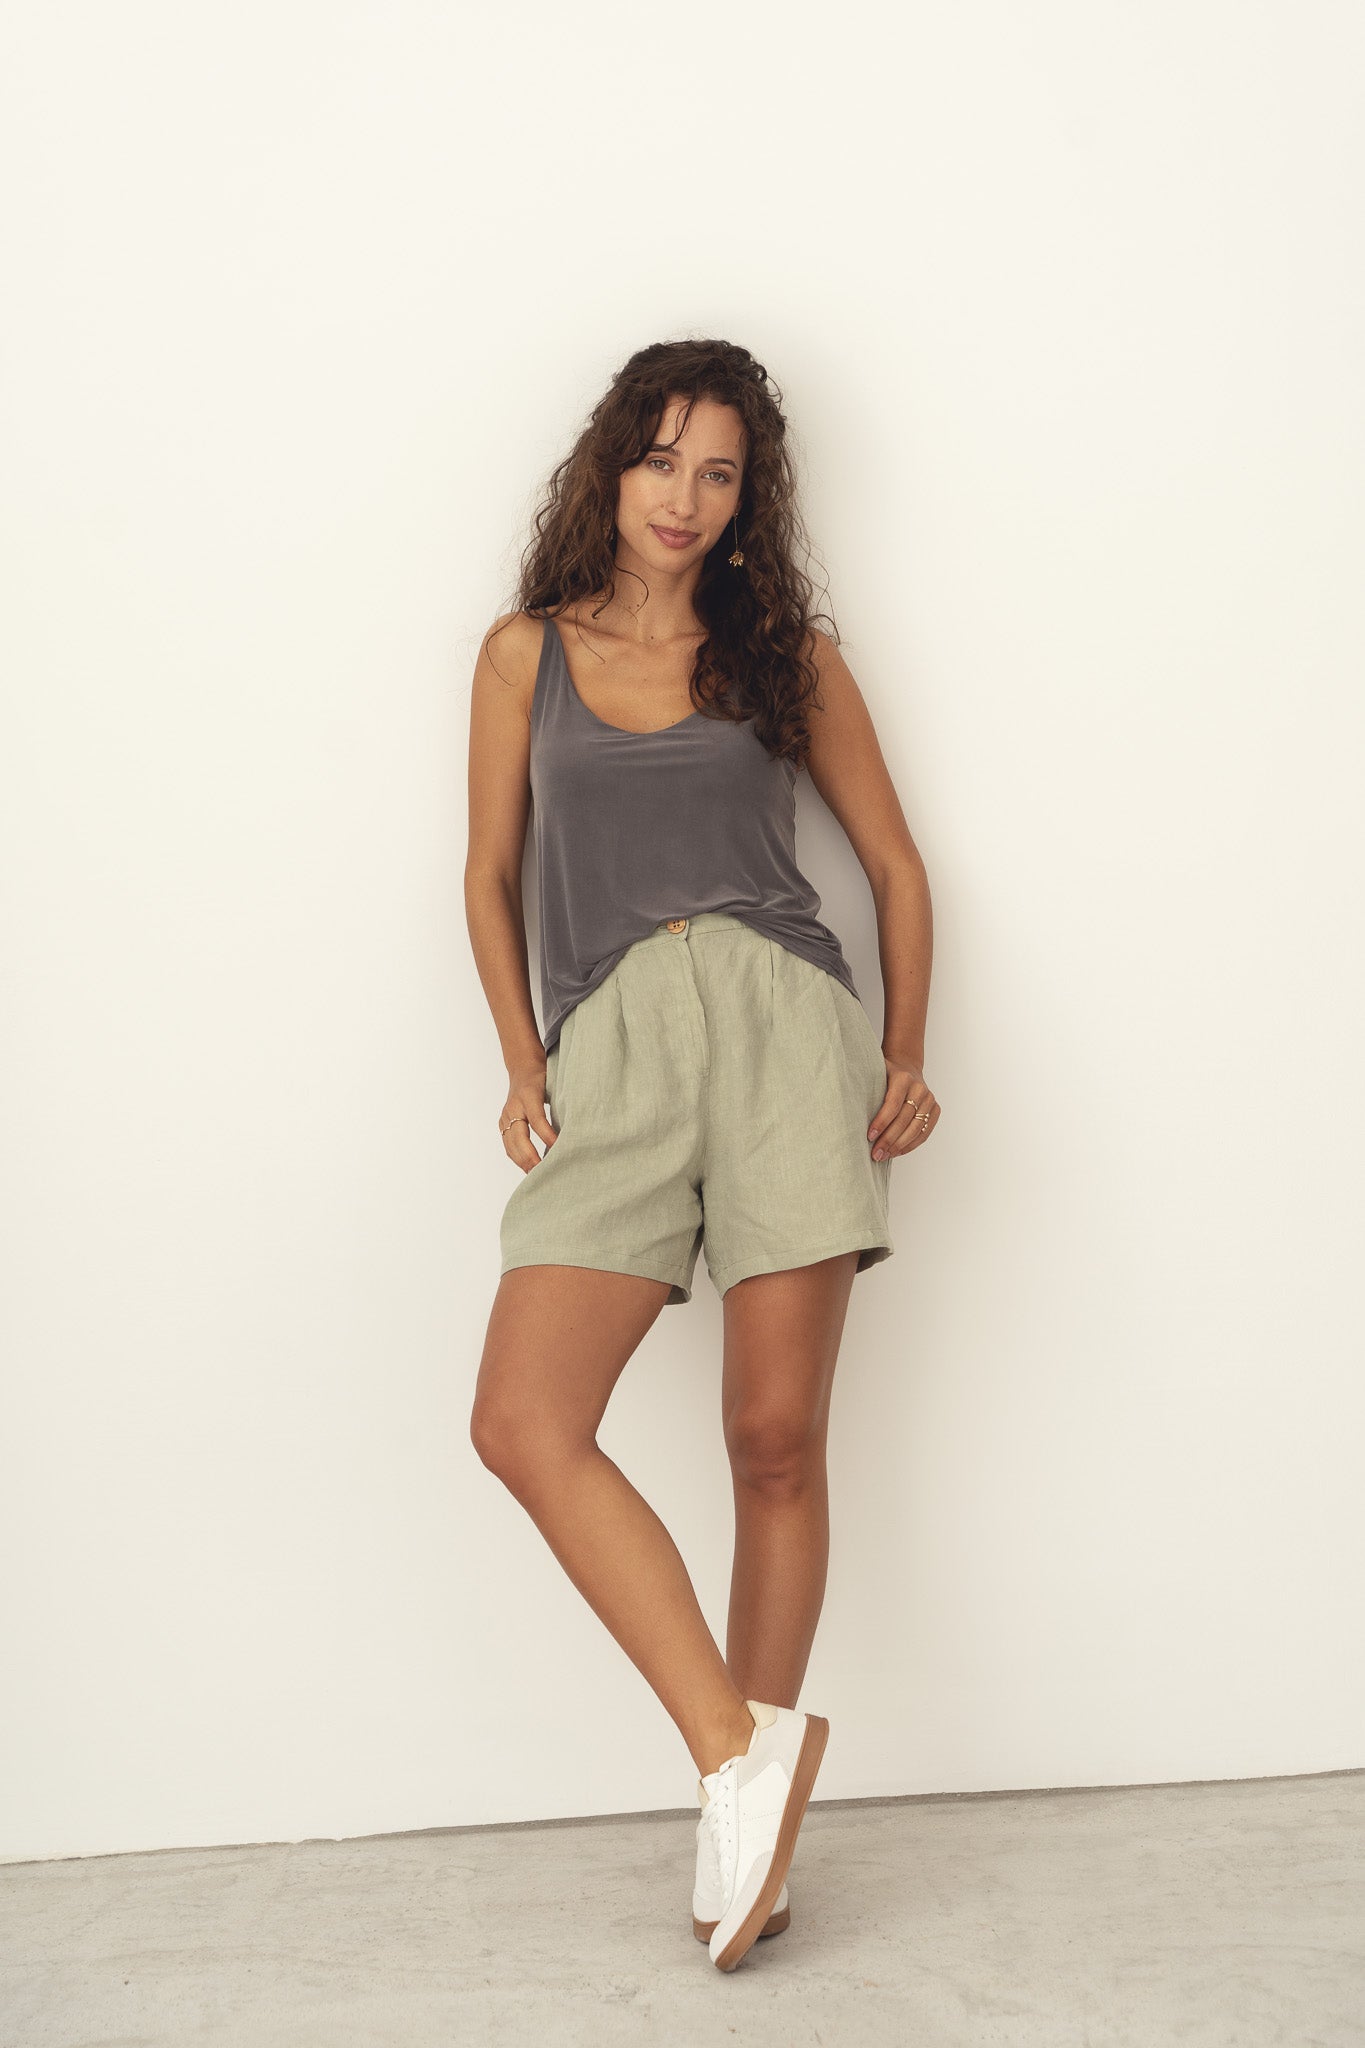 Naz women's linen shorts in sage green. Breathable fabric made in Portugal with lasting quality.